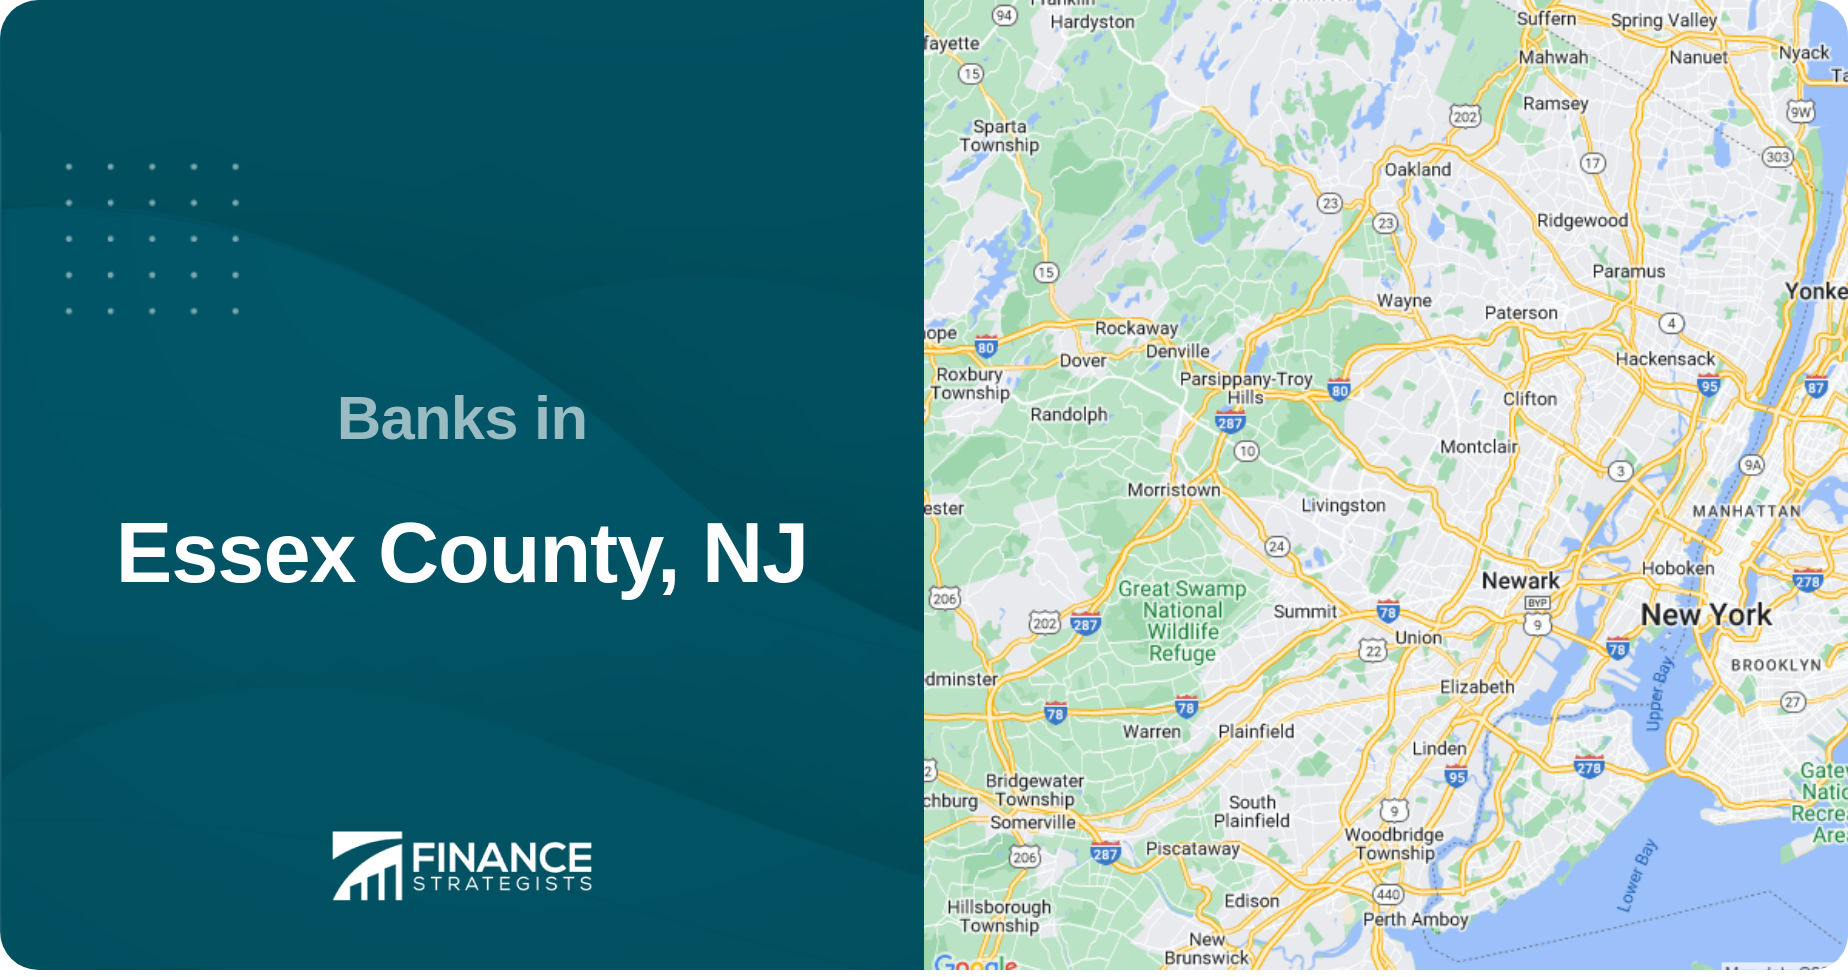 Banks in Essex County, NJ